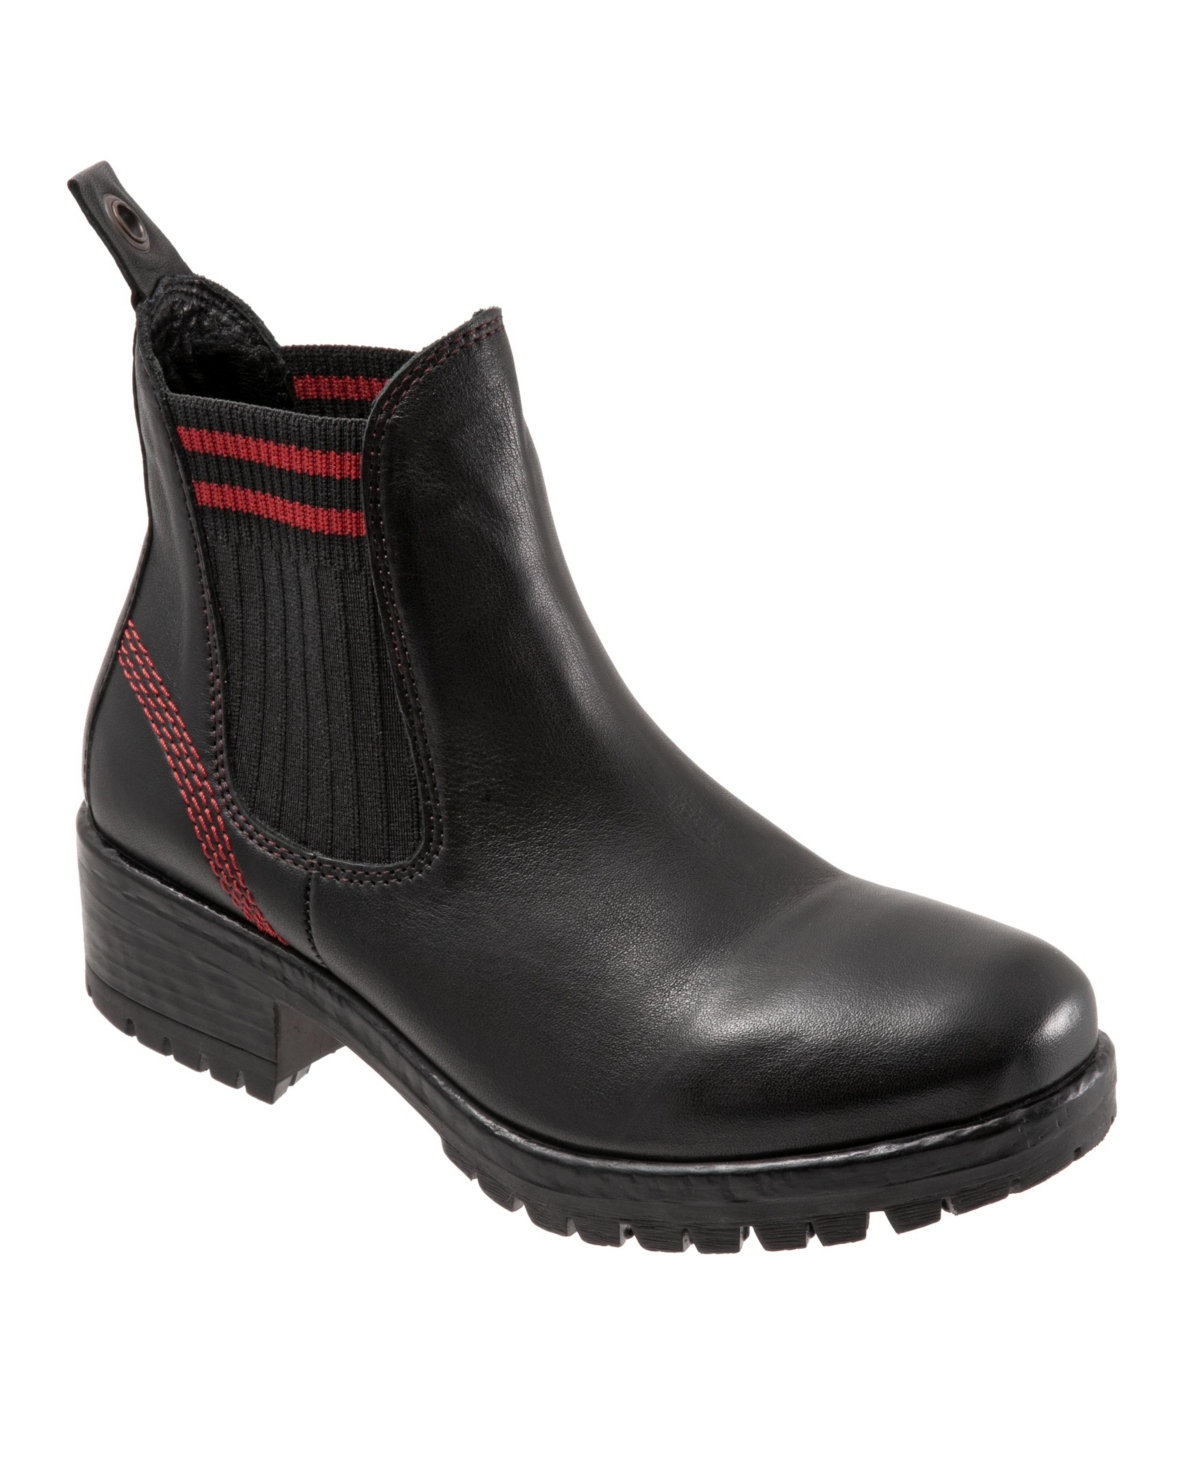 Women's Florida Boots - Black/red knit